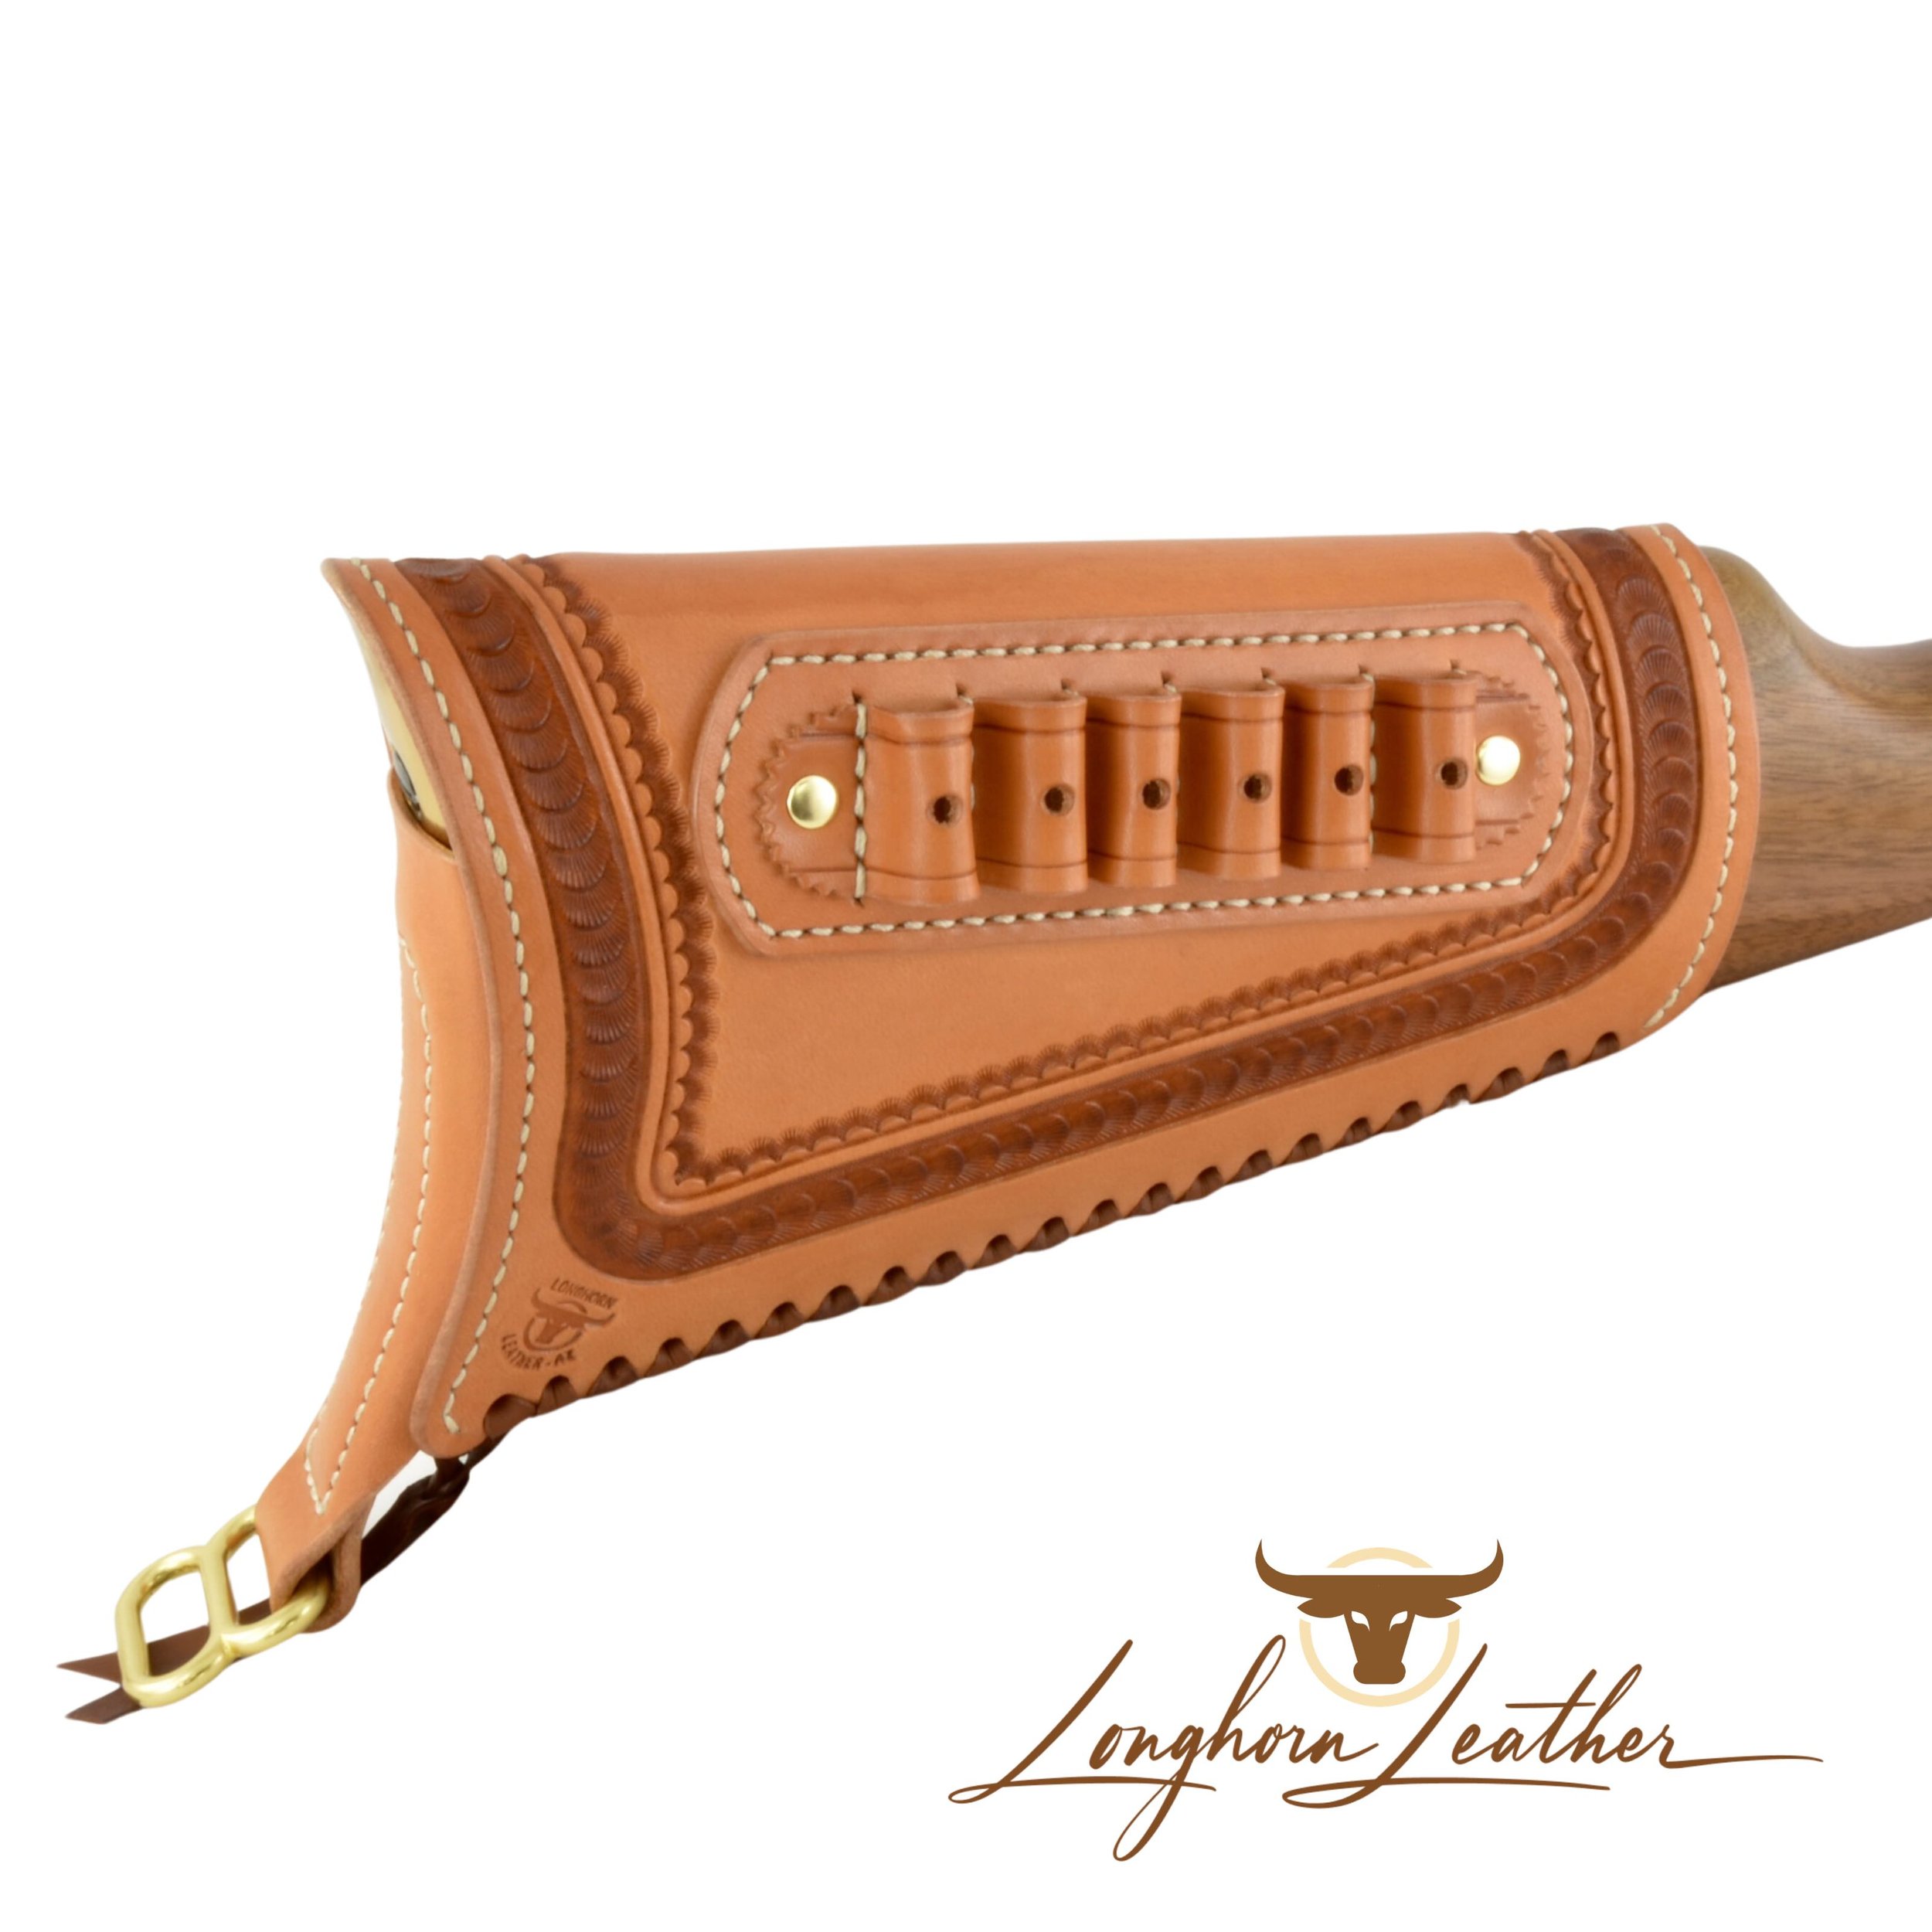 Custom leather gunstock cover featuring the Tucson design. Individually handcrafted at Longhorn Leather AZ.jpg